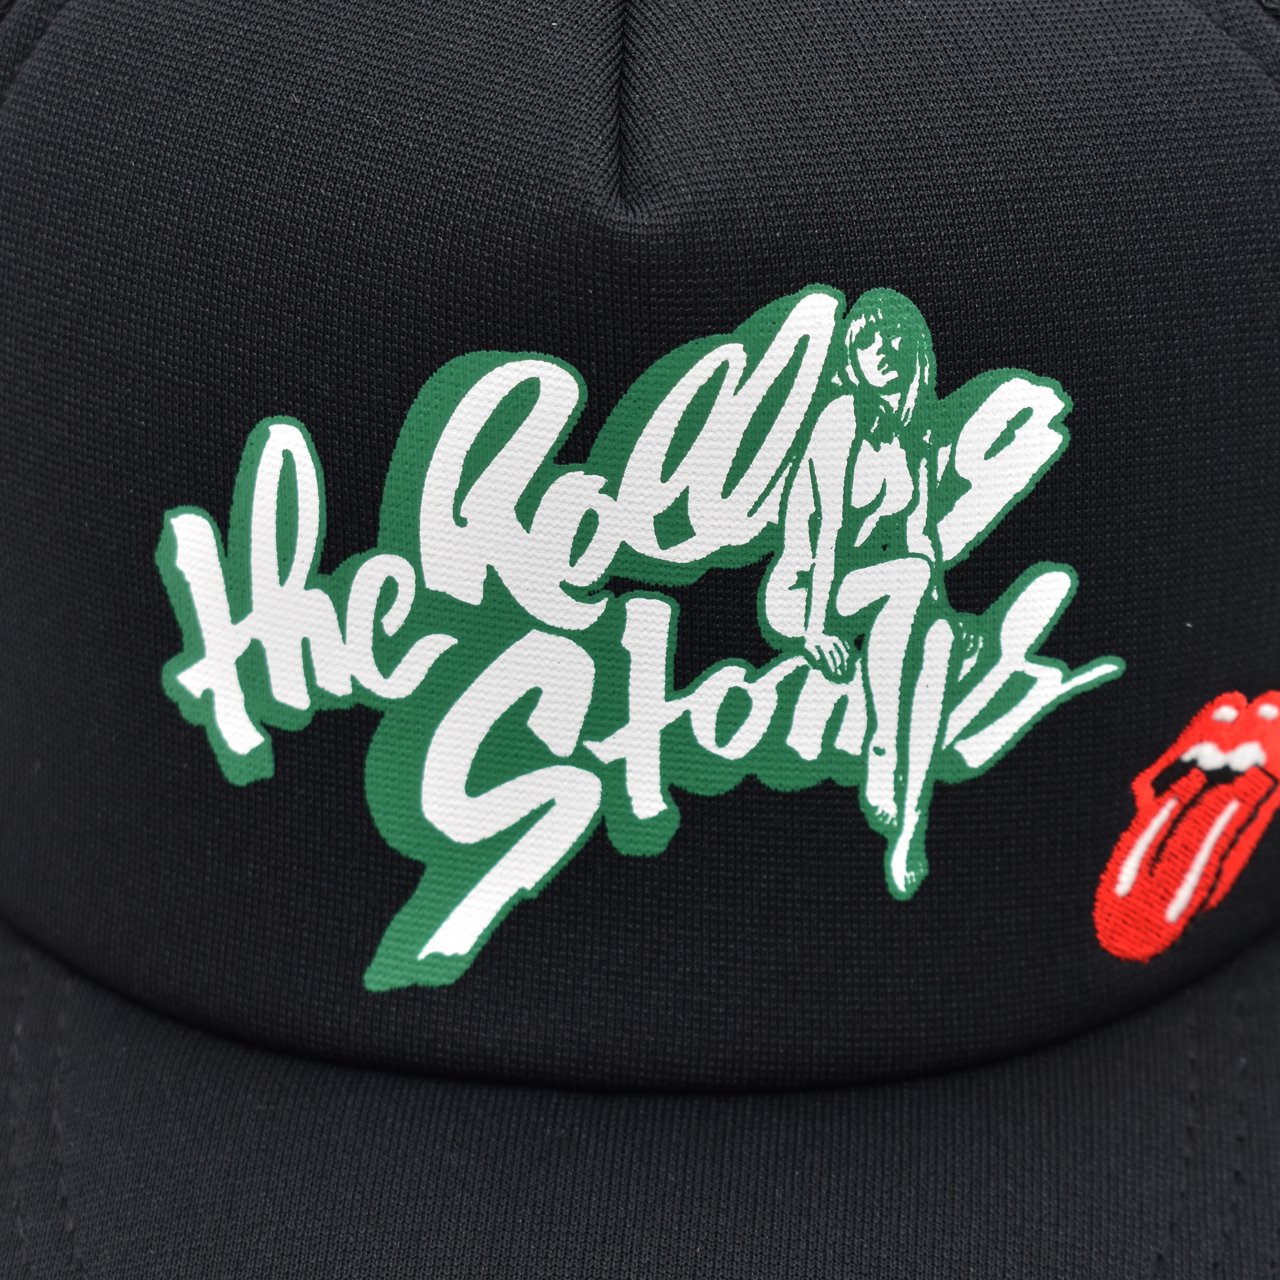 HYSTERIC GLAMOUR×THE ROLLING STONES 
GIRL SITTING RS LOGO メッシュキャップ
ヒステリックグラマー
ローリングストーンズ